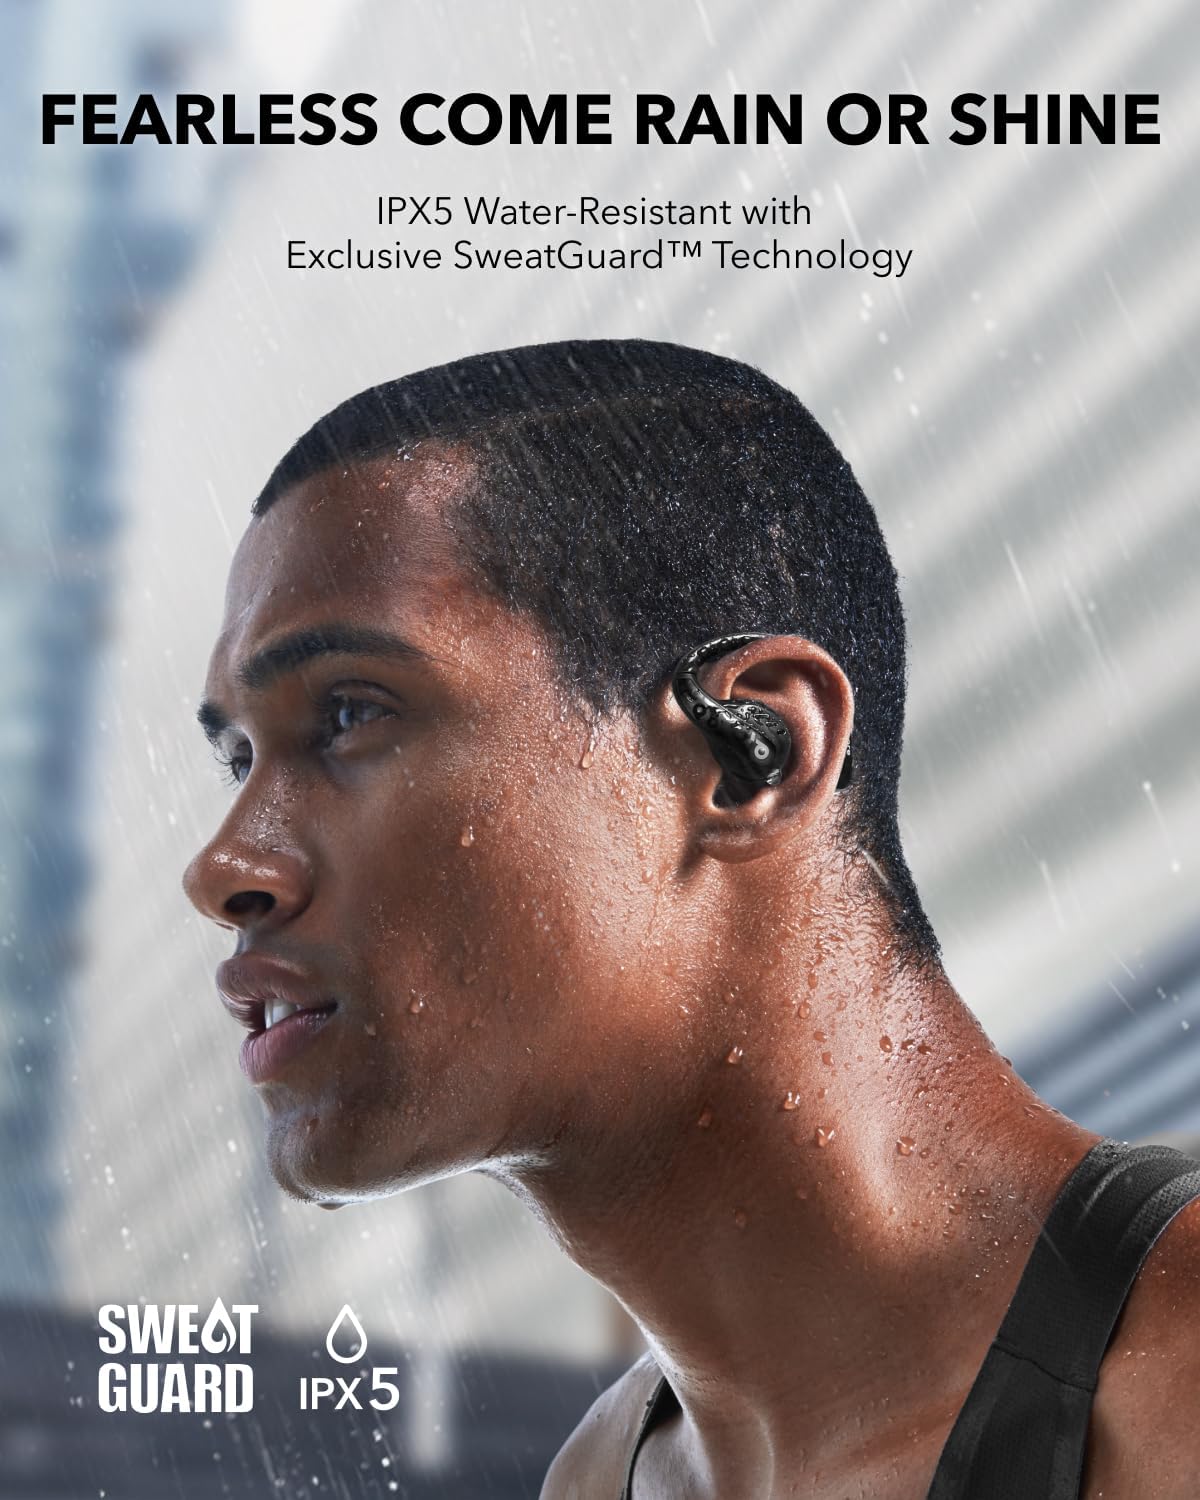 Soundcore by Anker AeroFit Pro Open-Ear Headphones, Ultra Comfort, Secure Fit, Ergonomic Design, Rich Sound with LDAC, Bluetooth 5.3, IPX5 Water-Resistant, 46H Playtime, App Control, Wireless Earbuds, Dynamic Black